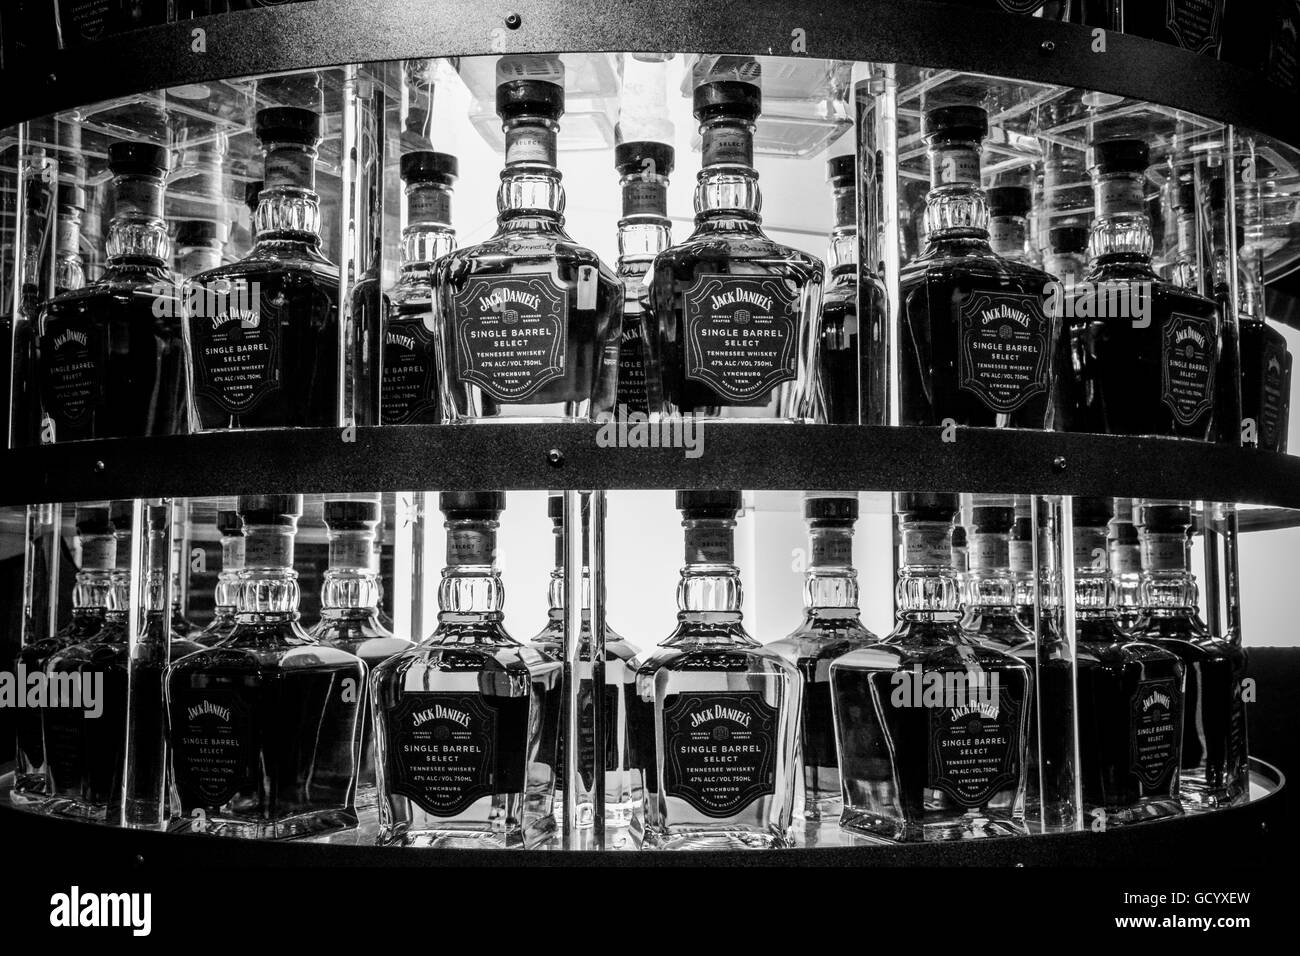 Bottles of Jack Daniel's Single Barrel Select Whiskey in tree shaped display during the tour of the Distillery in Lynchburg, TN, USA, in B & W Stock Photo